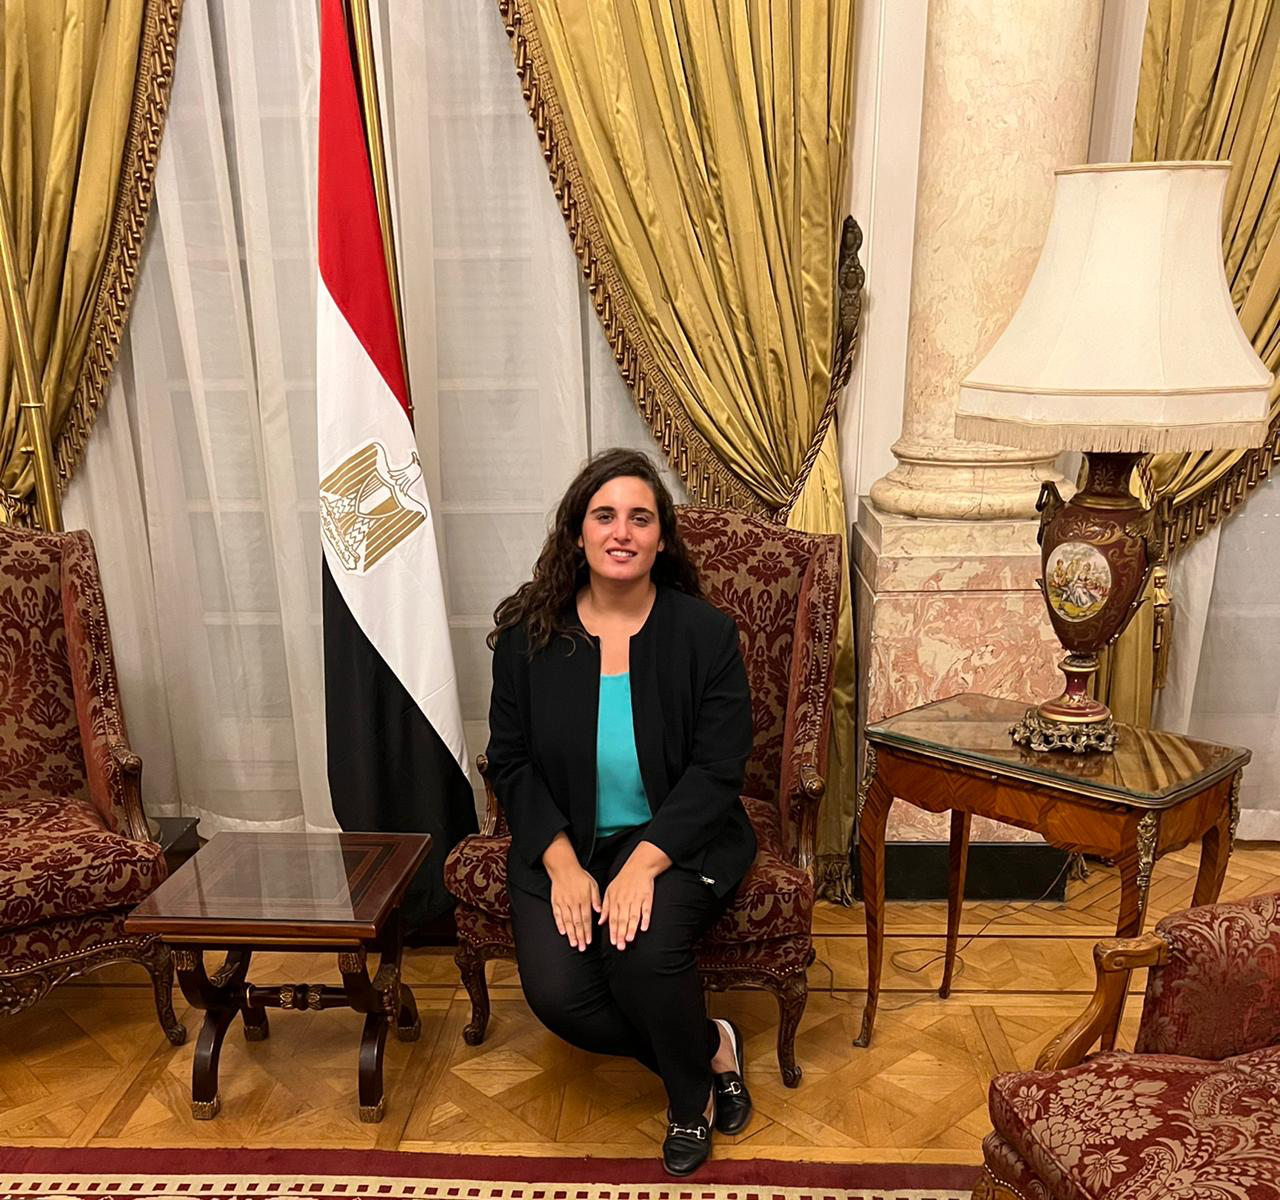 PPAD Student training at the Institute of Diplomatic studies with egypt's flag next to her